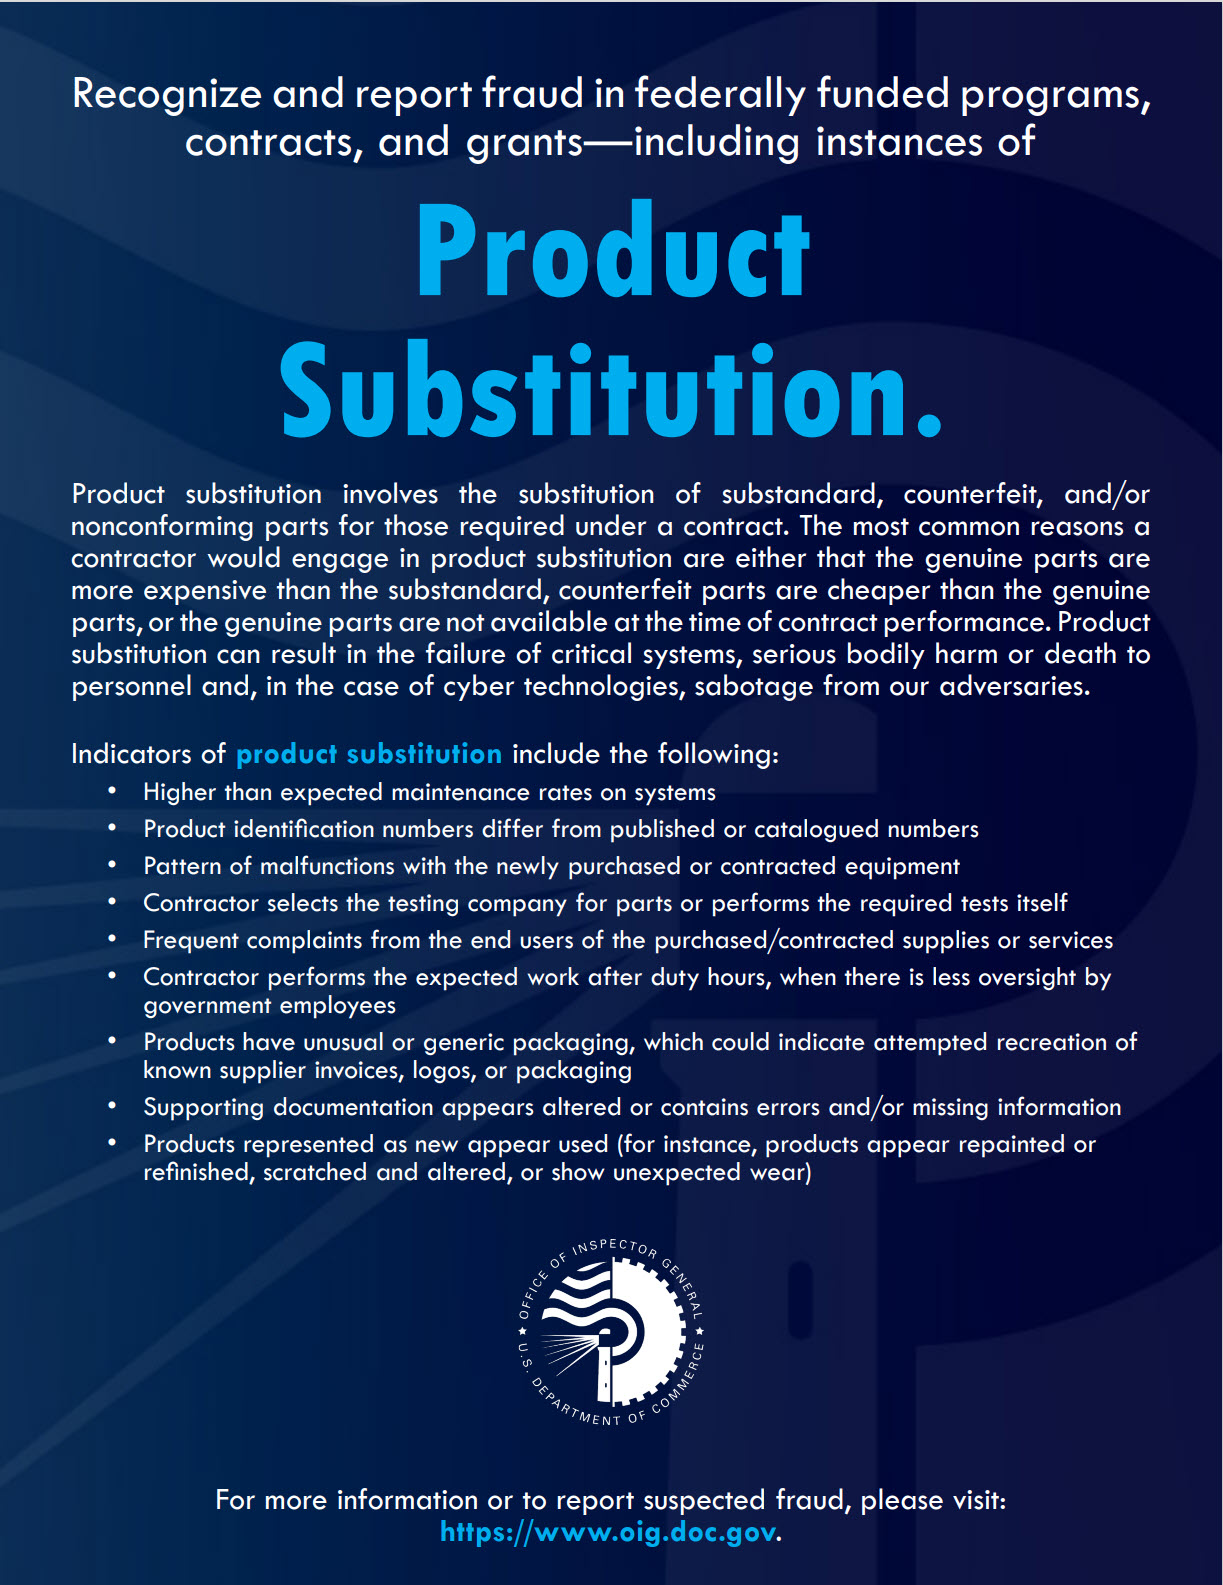 Post2__Product_Substitution_Flyer_2021-11-09.jpg